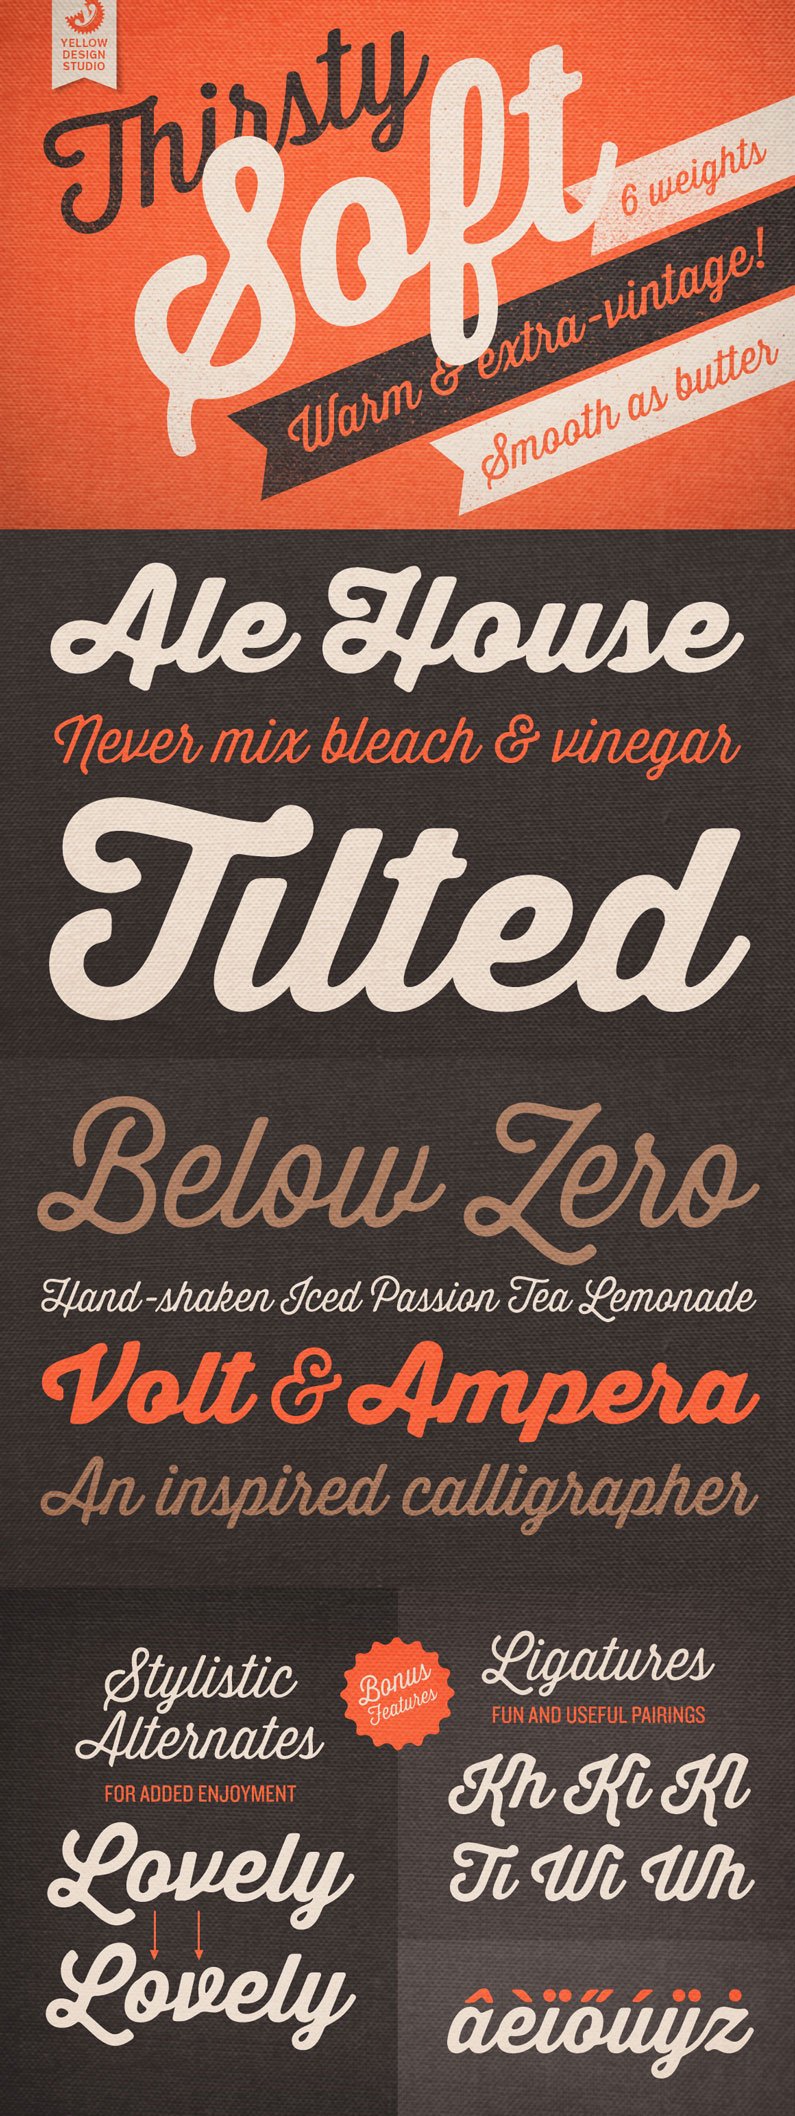 Thirsty Soft is a font that is warm, buttery smooth, adding friendliness and and extra level of vintage appeal to your design.